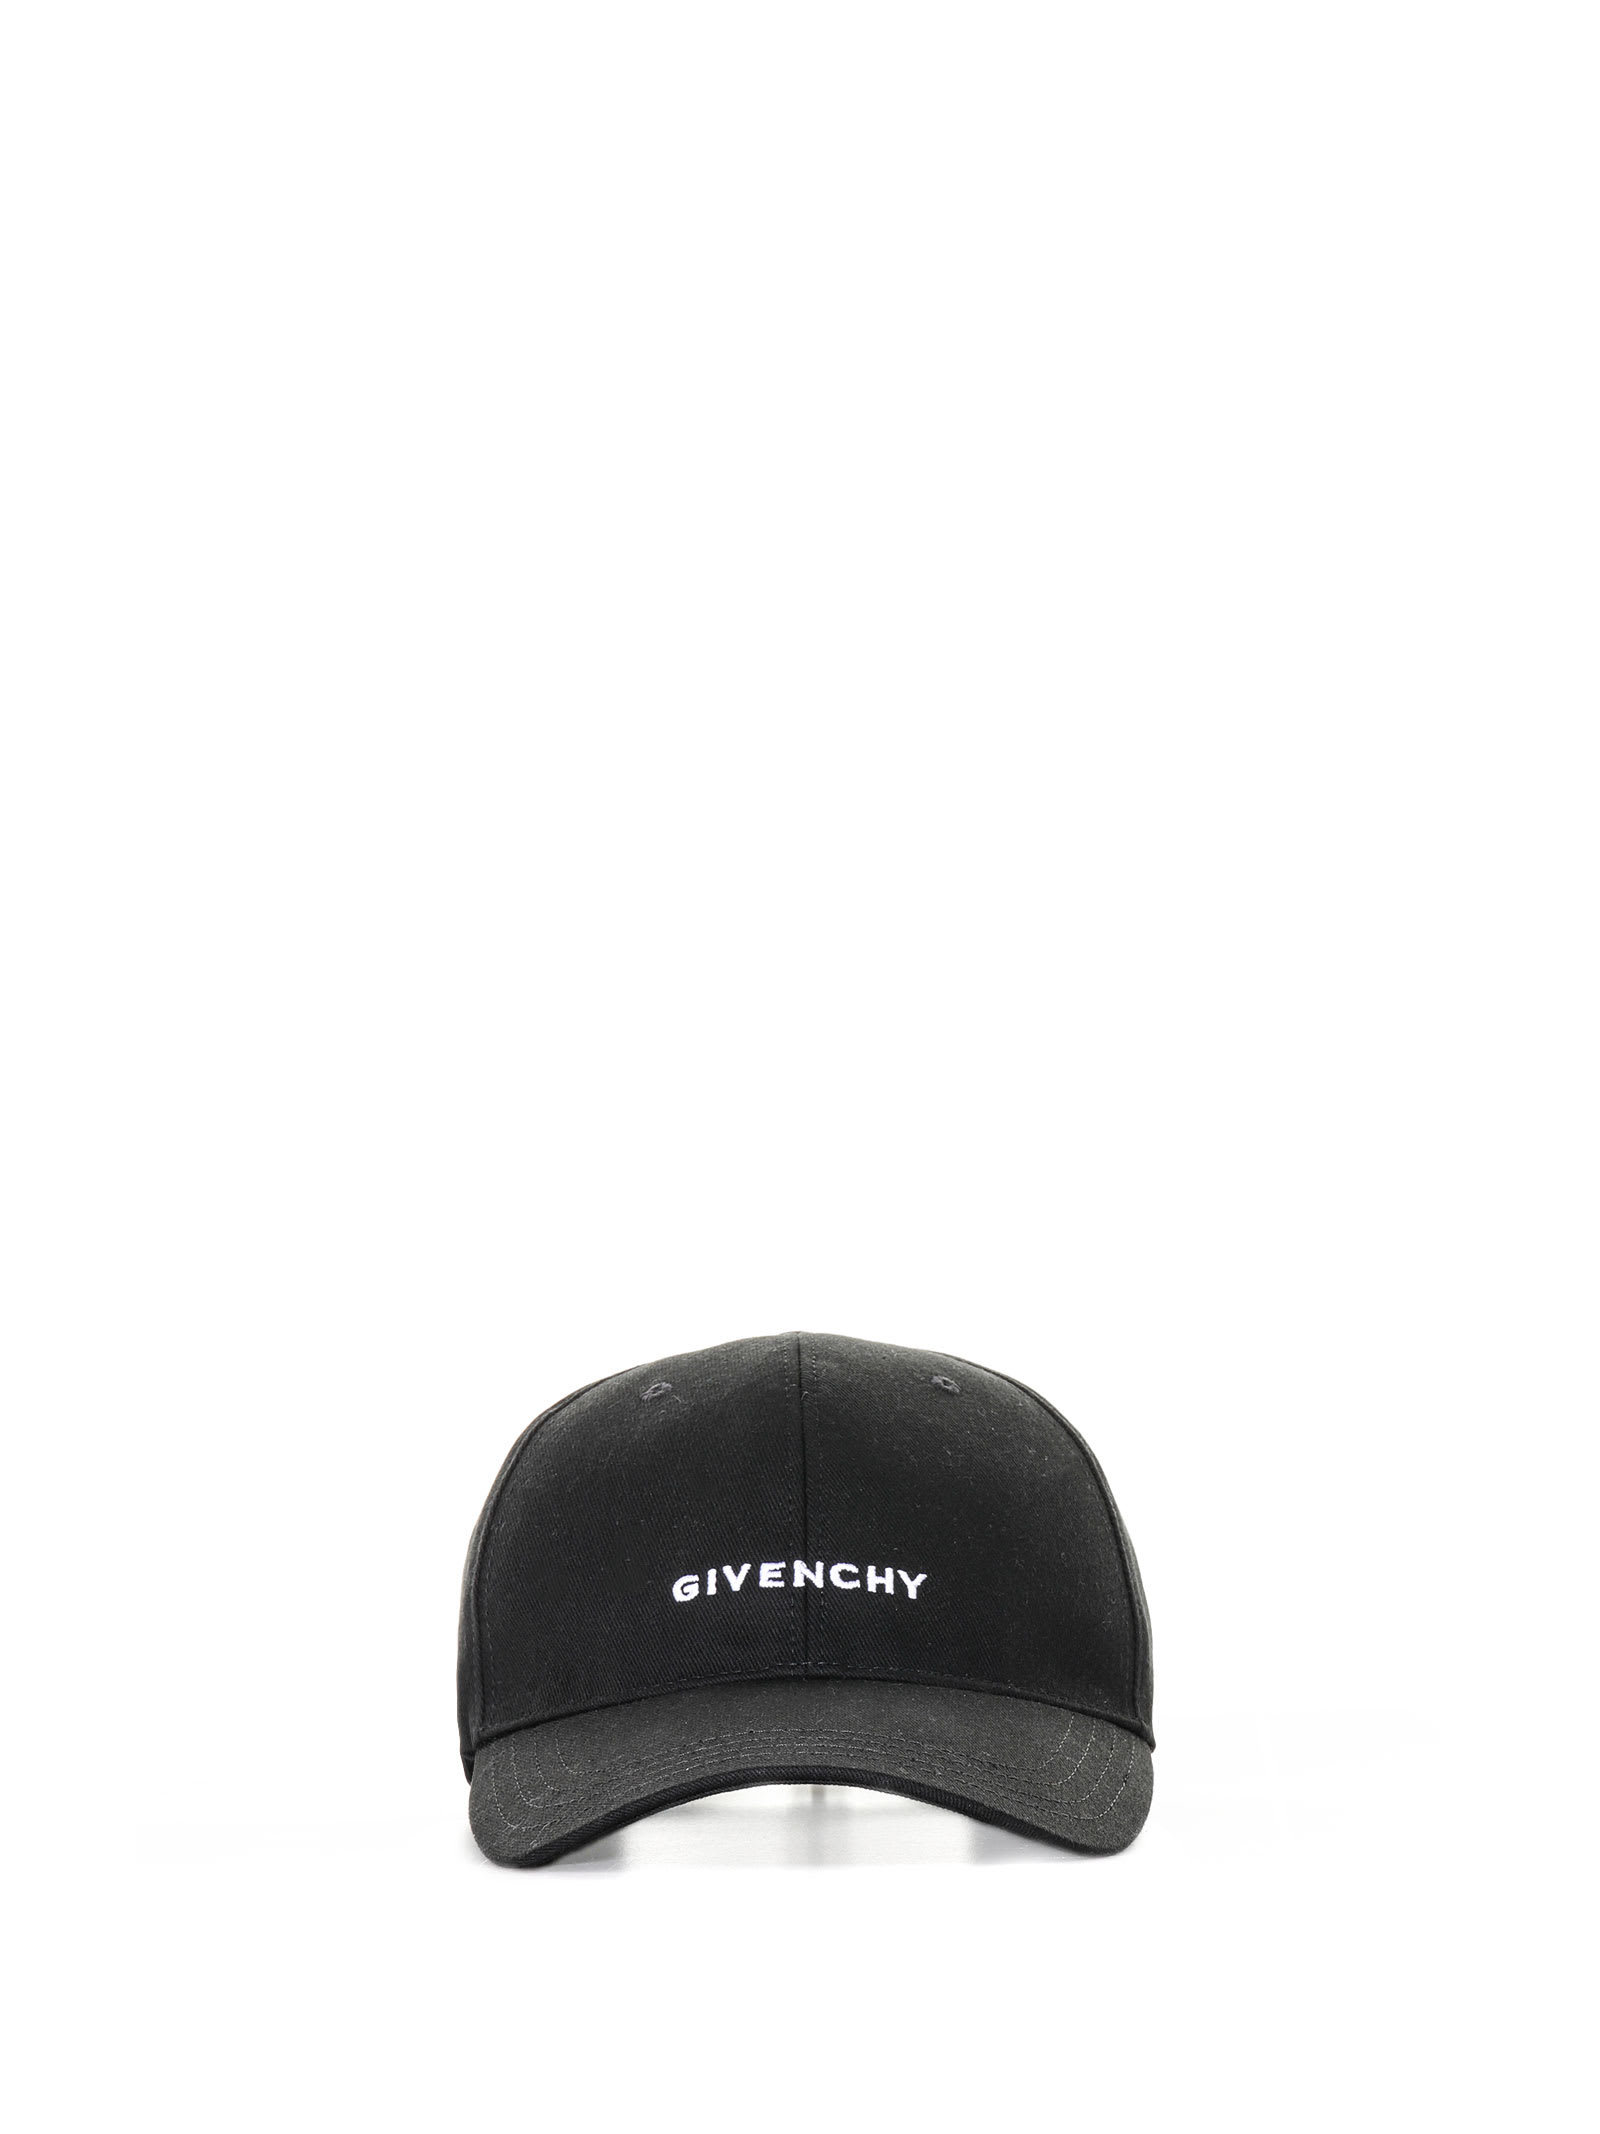 Givenchy Cap With Embroidery